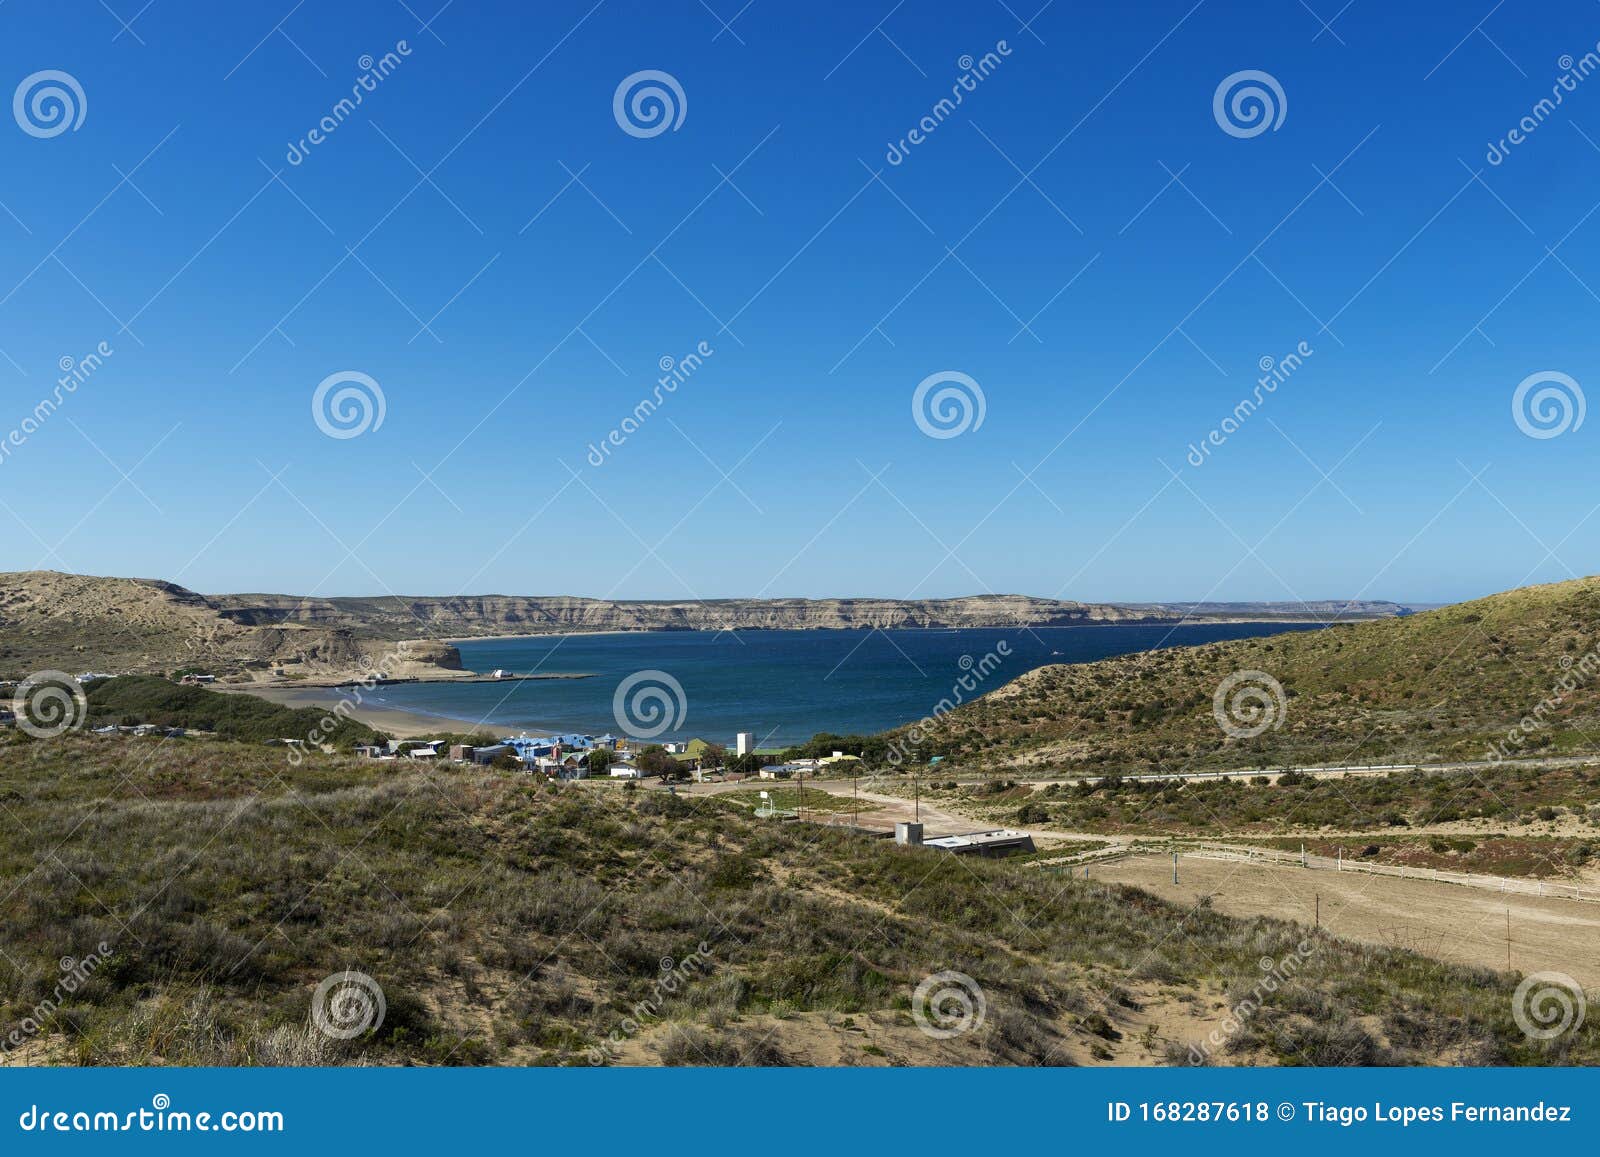 view of the town of puerto piramides at the valdes peninsula in argentina